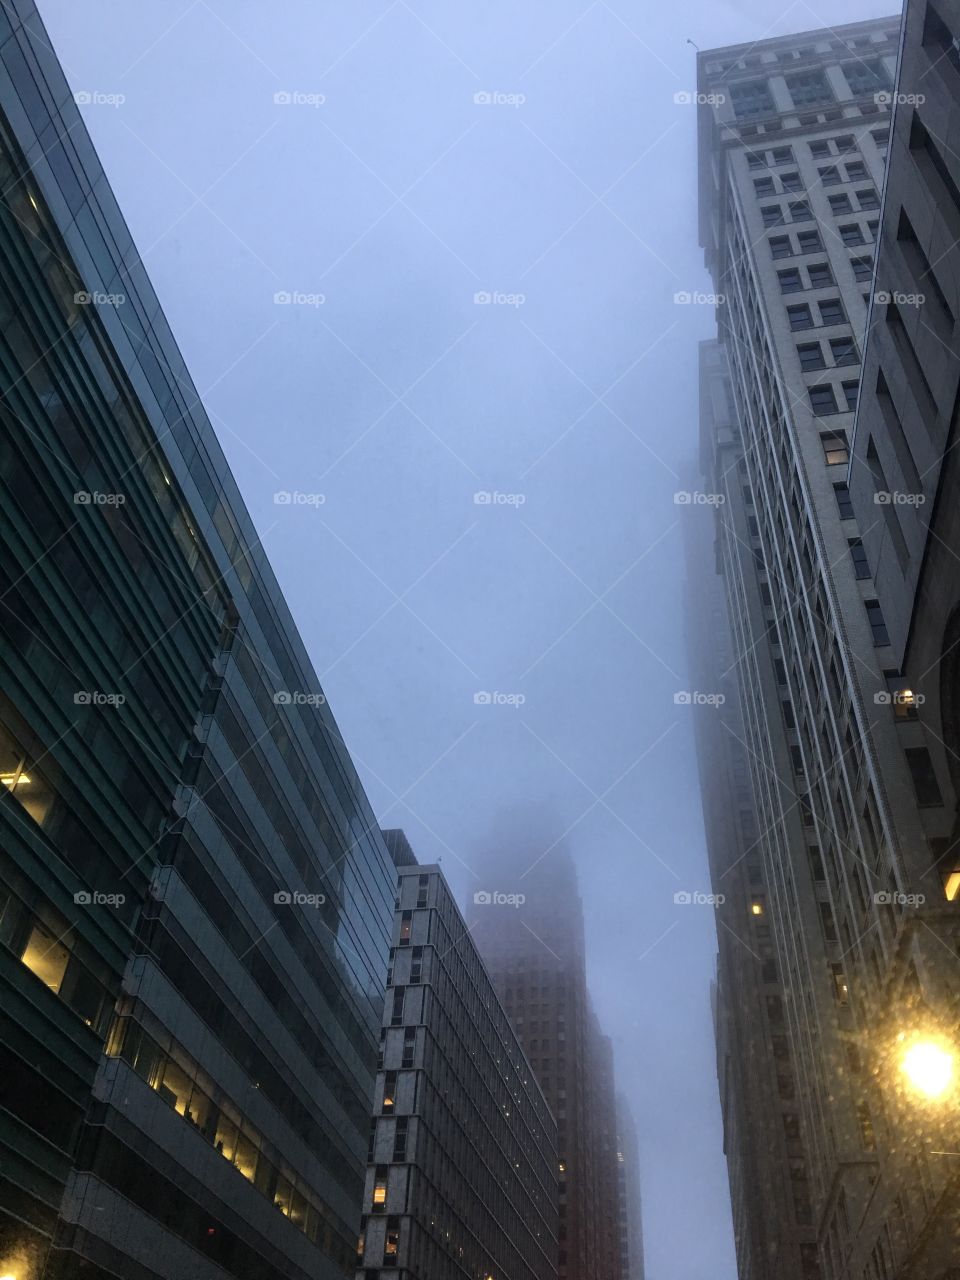 Foggy in the city